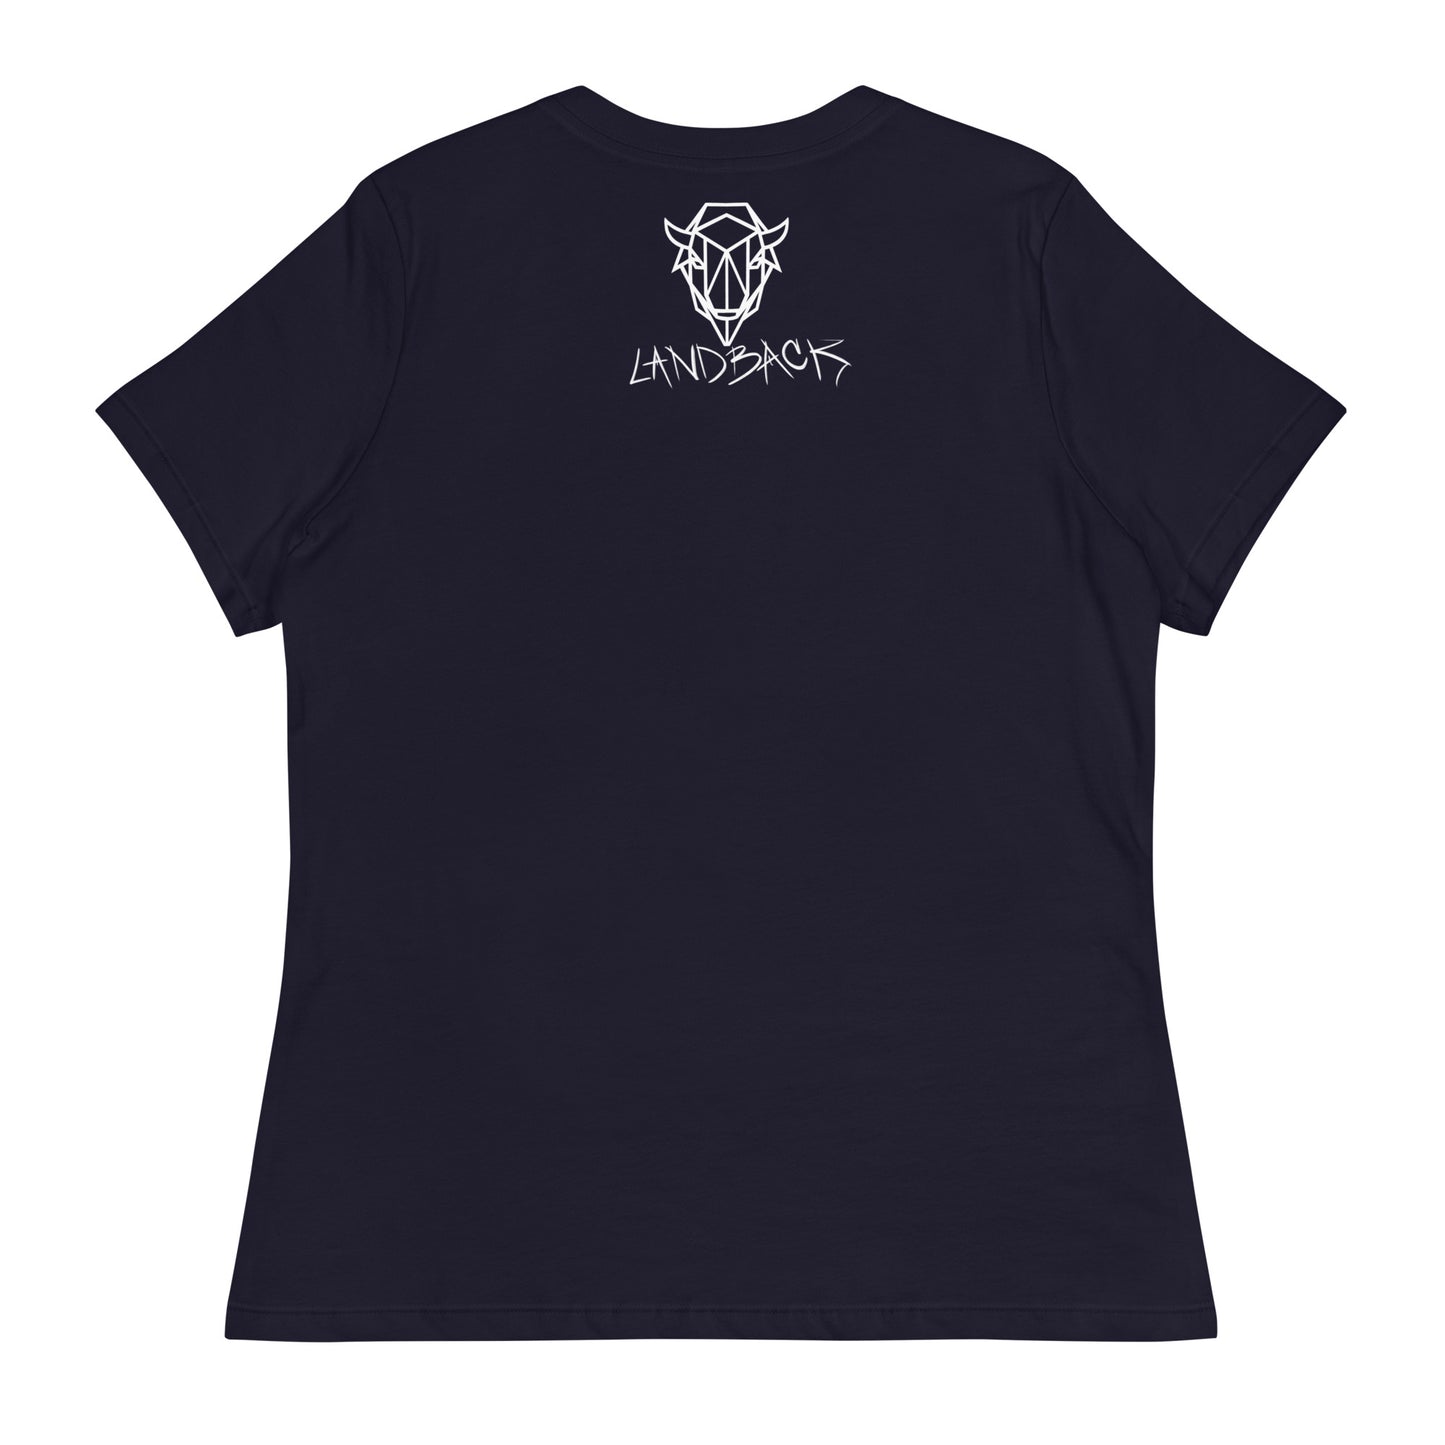 Women's Aunties Relaxed T-Shirt